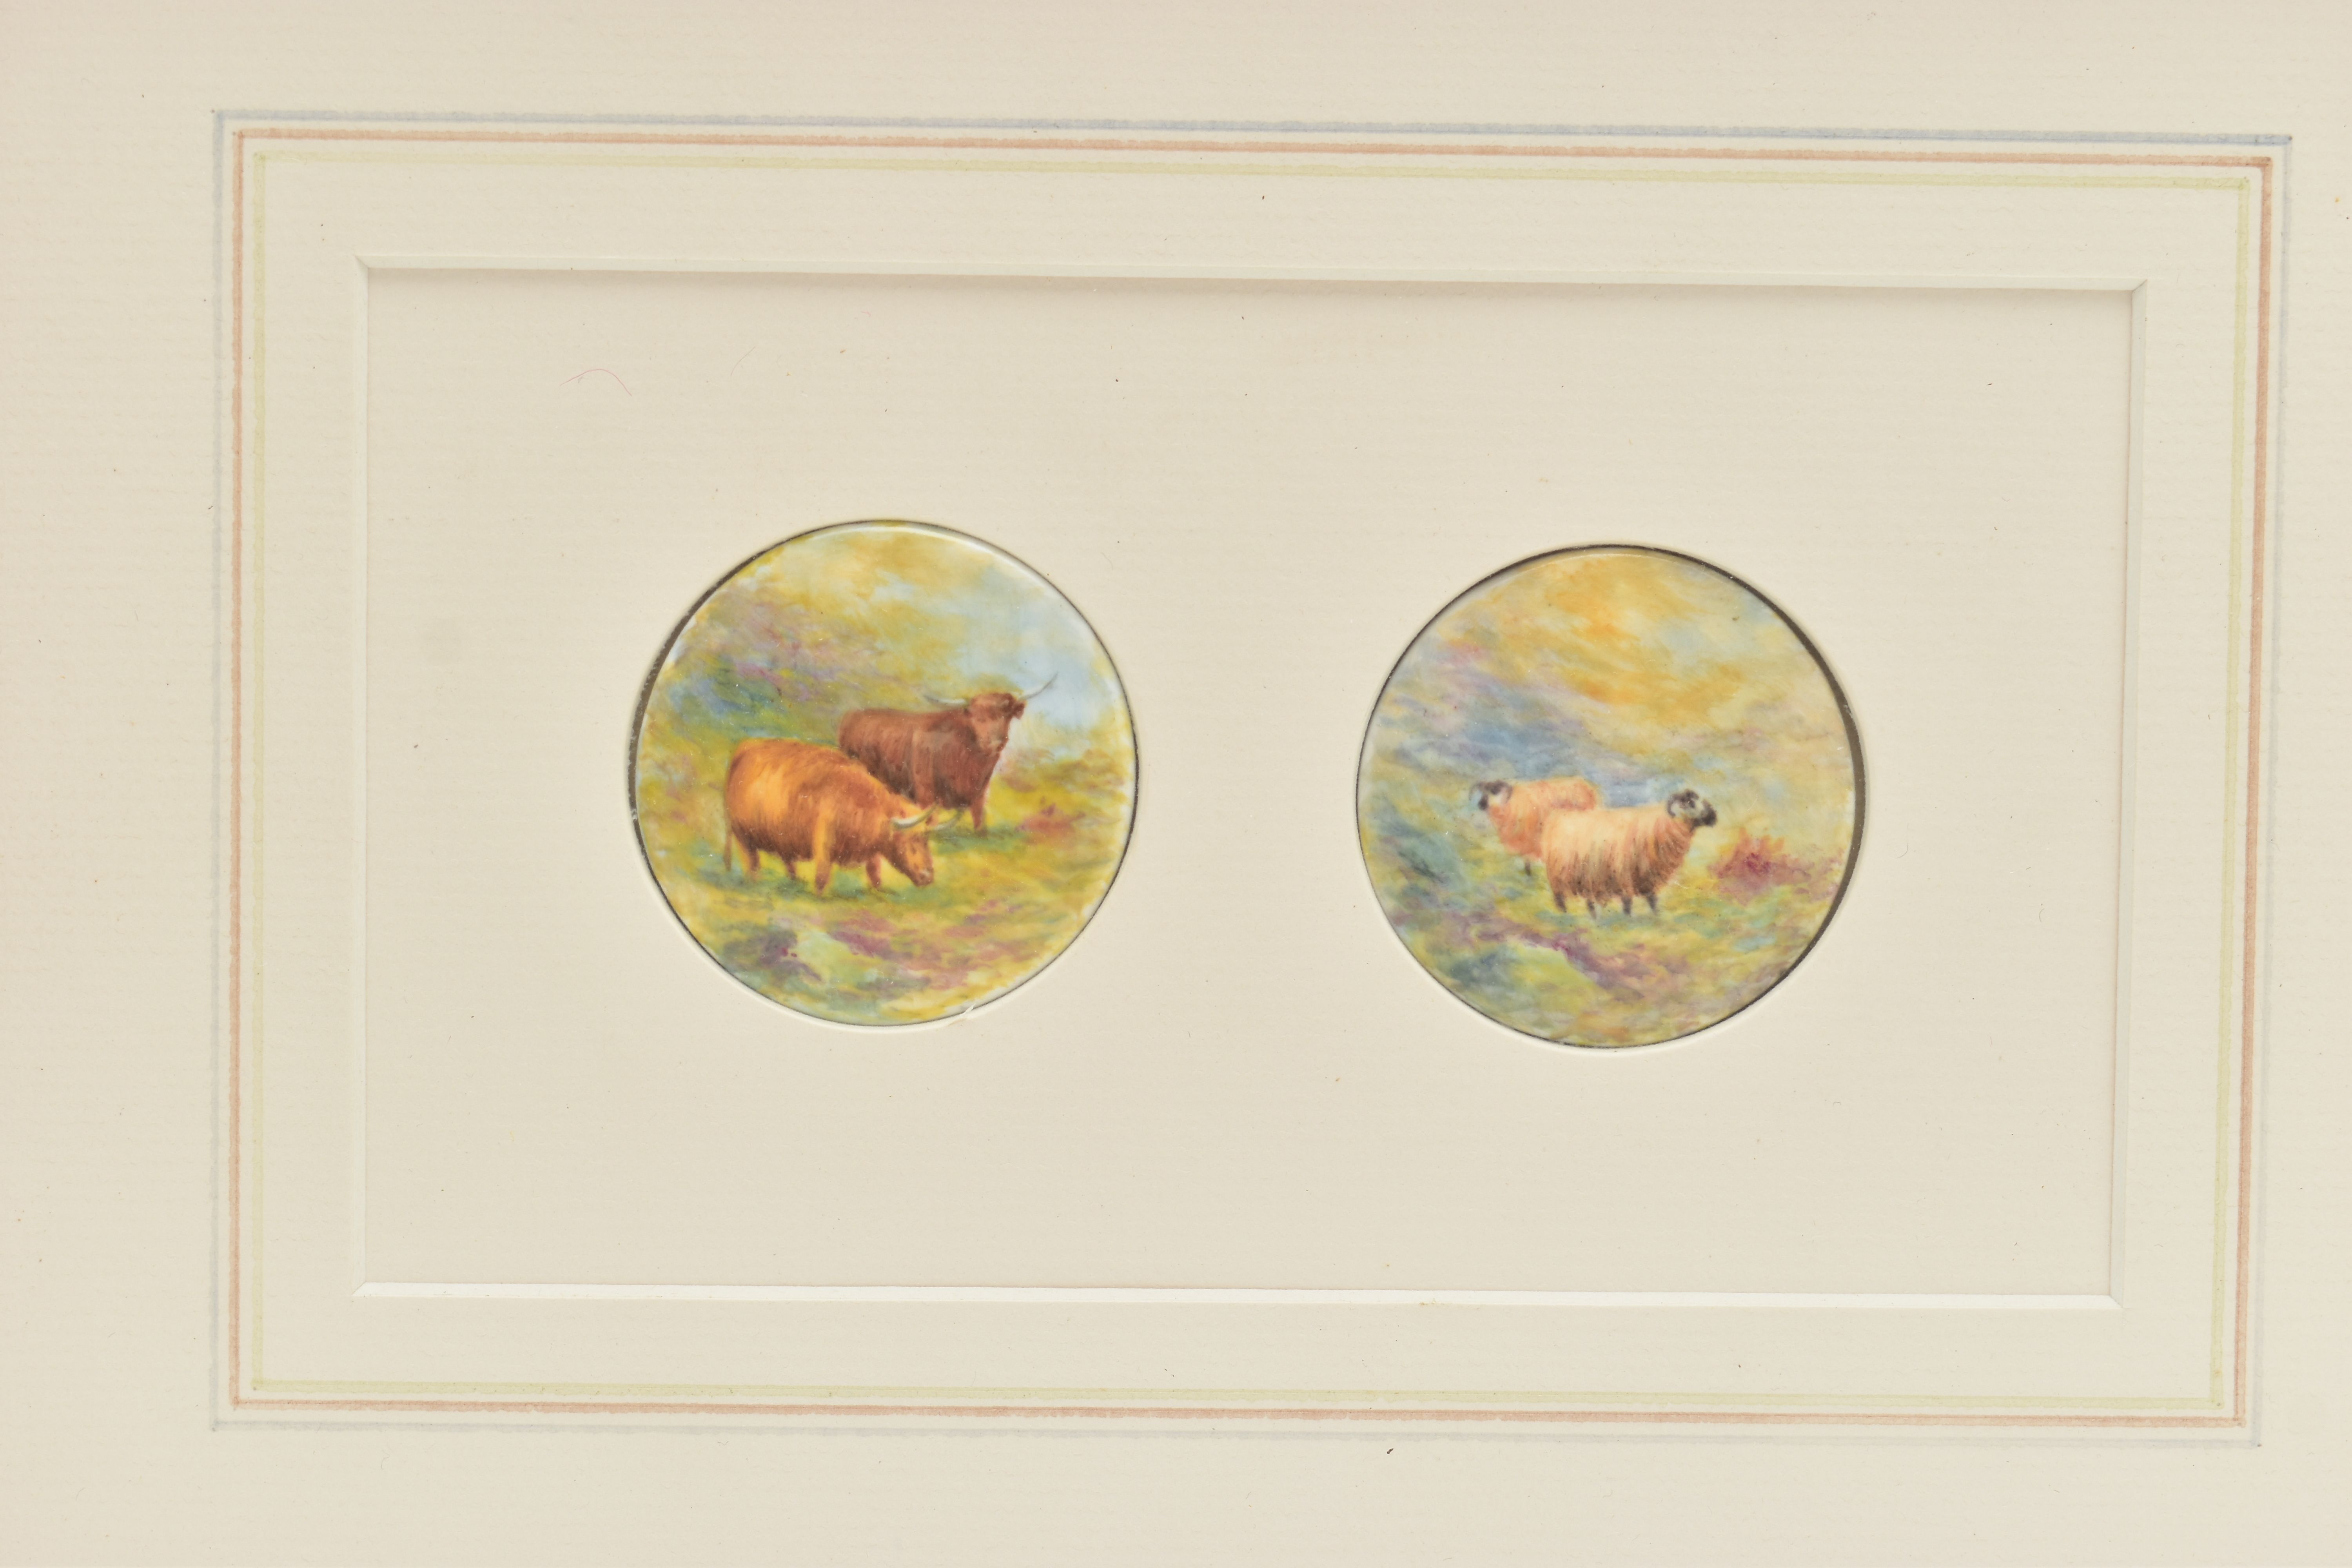 A FRAME CONTAINING TWO 20TH CENTURY CIRCULAR CONVEX PLAQUES HAND PAINTED WITH TWO HIGHLAND CATTLE - Image 2 of 4